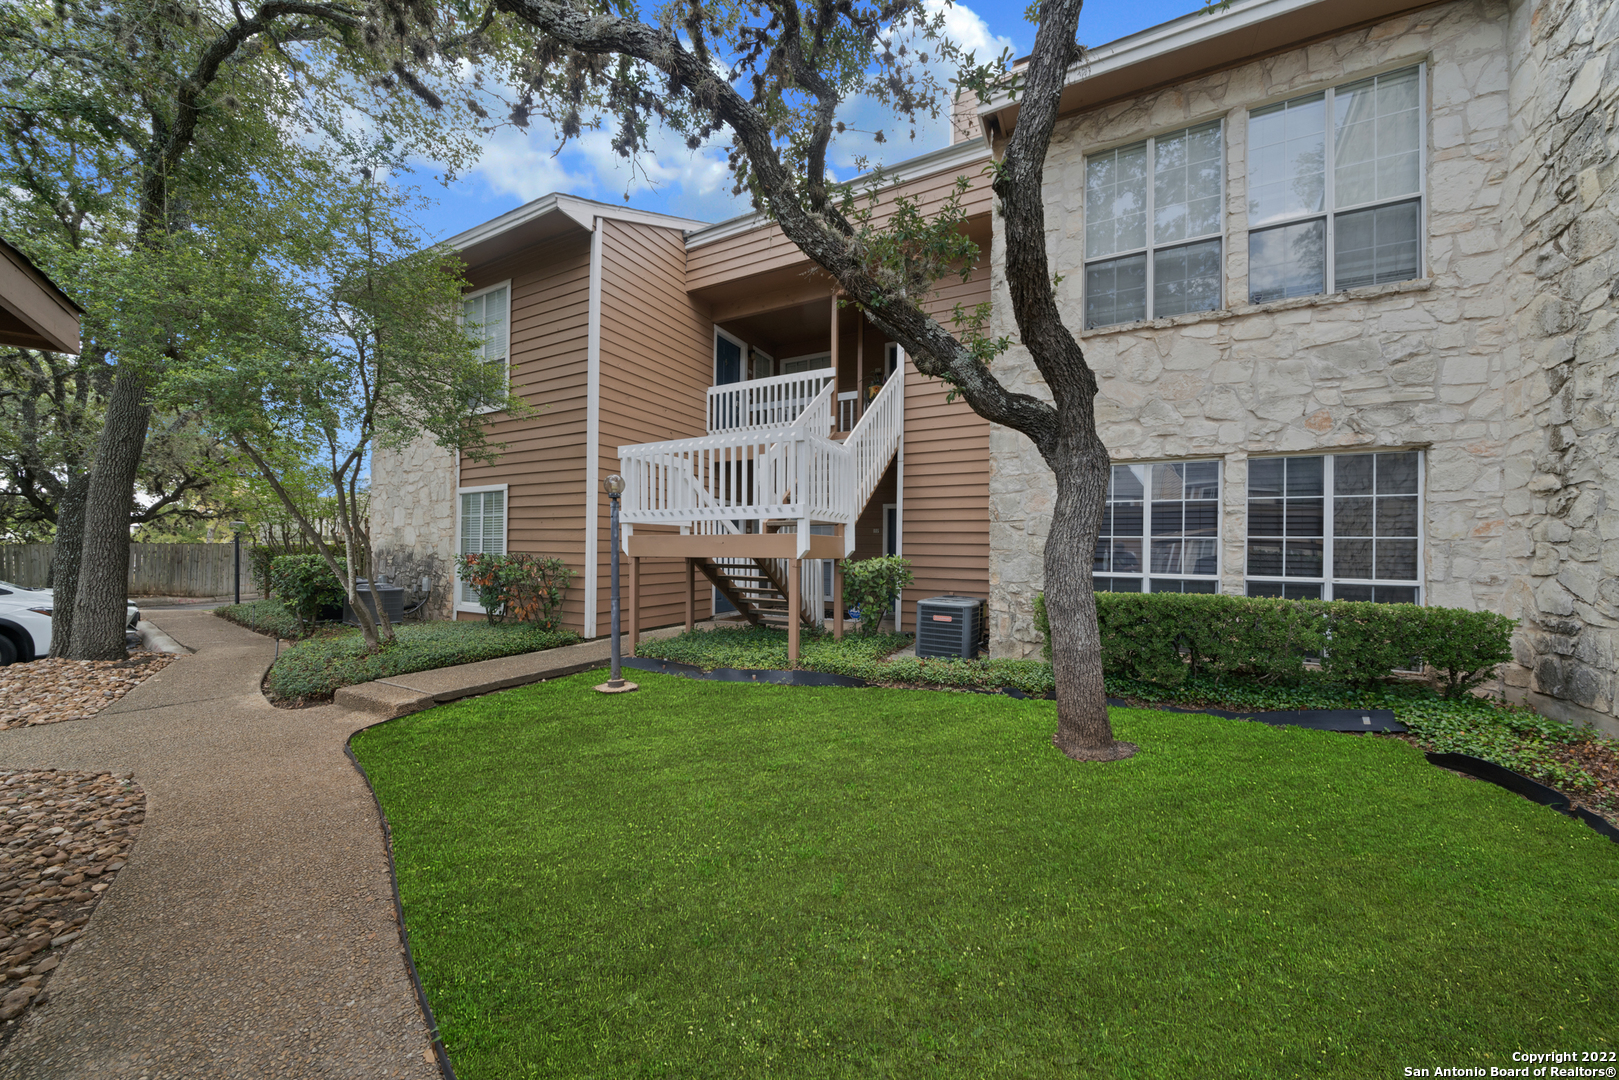 *** MULTIPLE OFFERS HAVE BEEN RECEIVED; PLEASE SUBMIT YOUR FINAL AND BEST OFFER BY TOMORROW WEDNESDAY 31st AT 9 AM*** MOVE IN READY! Well maintained and updated 2 Bedroom 2 Bath beautiful condominium! Convenient to all things UTSA, Loop 1604 & IH-10, La Cantera, The Rim, and the list goes on! Laminated wood floors through the house, Ceramic tile in kitchen and bathrooms! No carpet,  Wood burning fireplace,  abundant natural lighting front and back, Pool and clubhouse close by. One assigned covered parking space outside the front door with plenty of open parking. New paint inside 8/22,  HVAC replaced 2020.